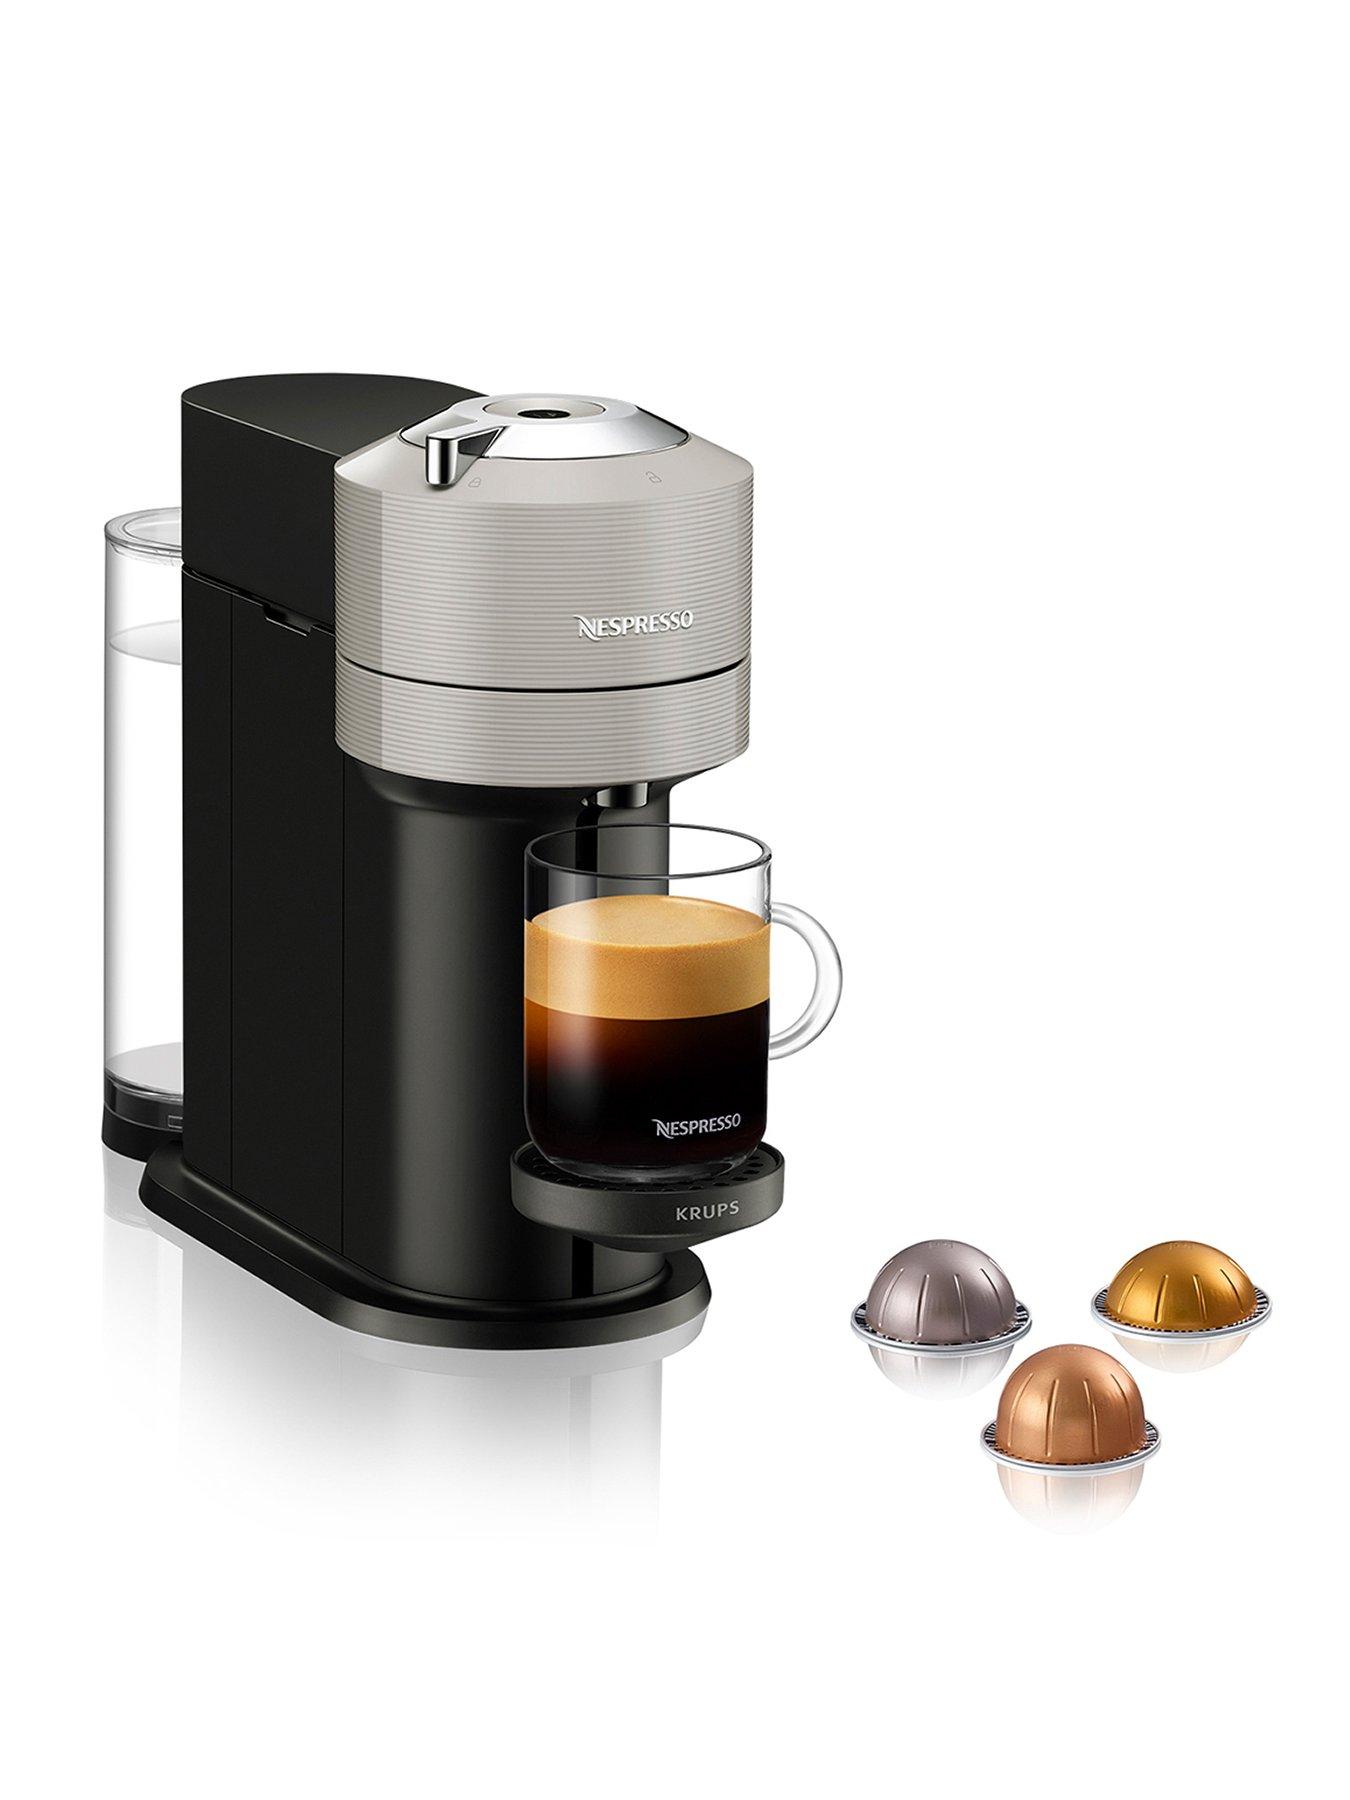 Introducing Nespresso Vertuo Pop: Endless Coffee Styles, Now In Colour!